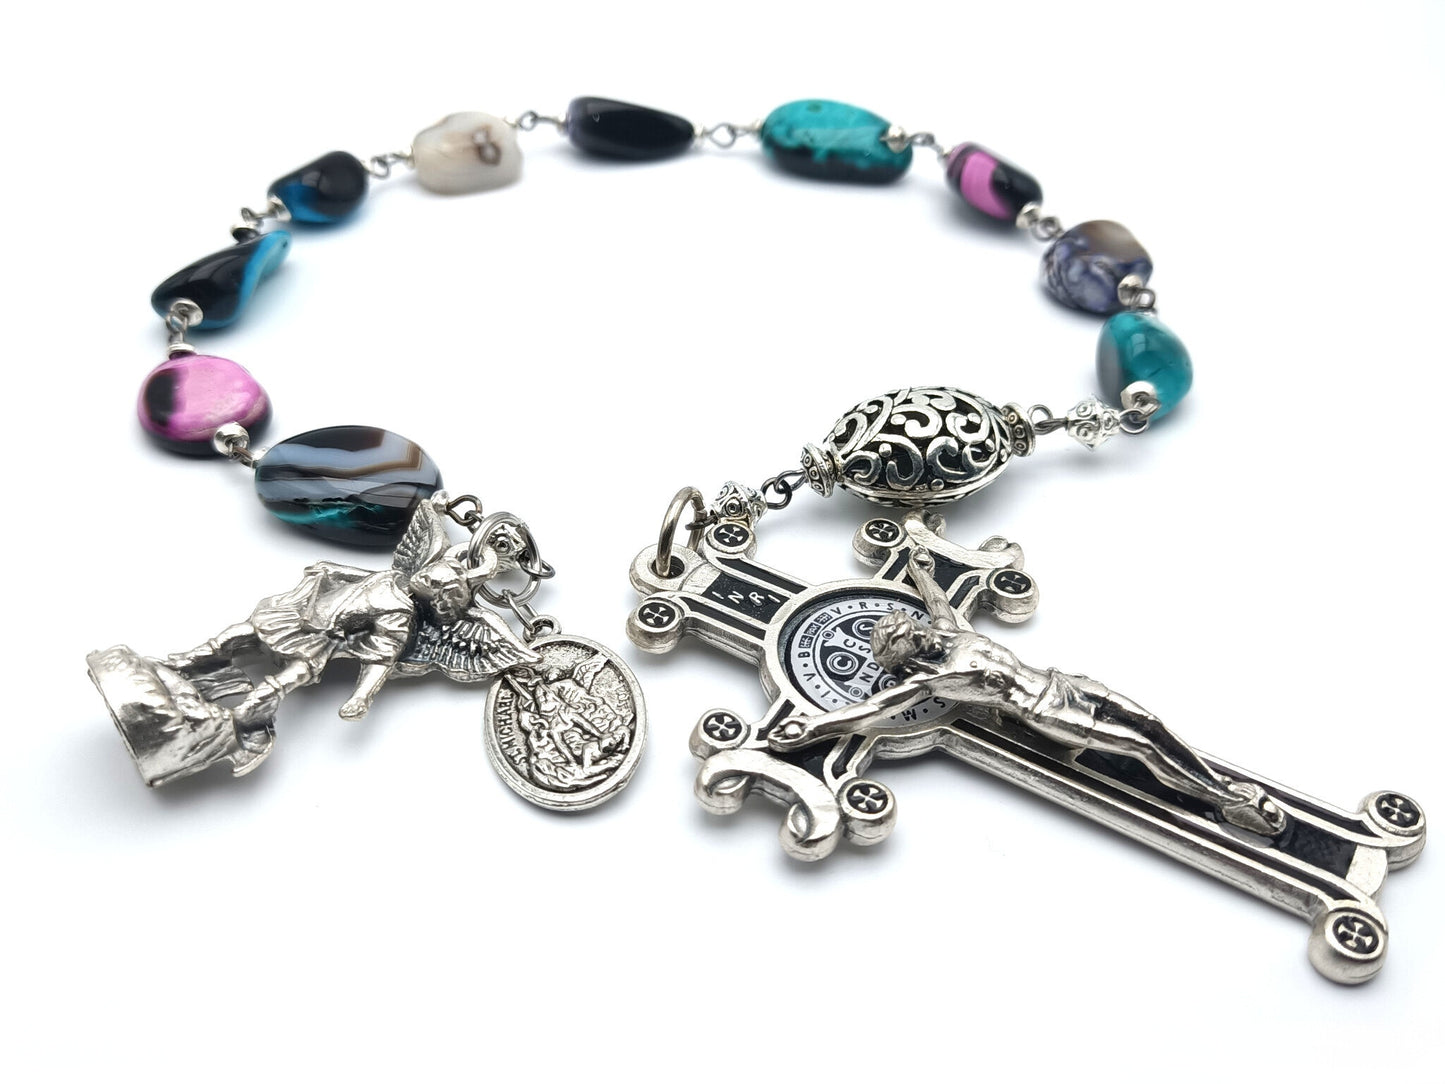 Saint Michael unique rosary beads single decade or tenner rosary with multi coloured gemstone beads, silver Saint Benedict crucifix, pater bead and statue Saint Michael medal.